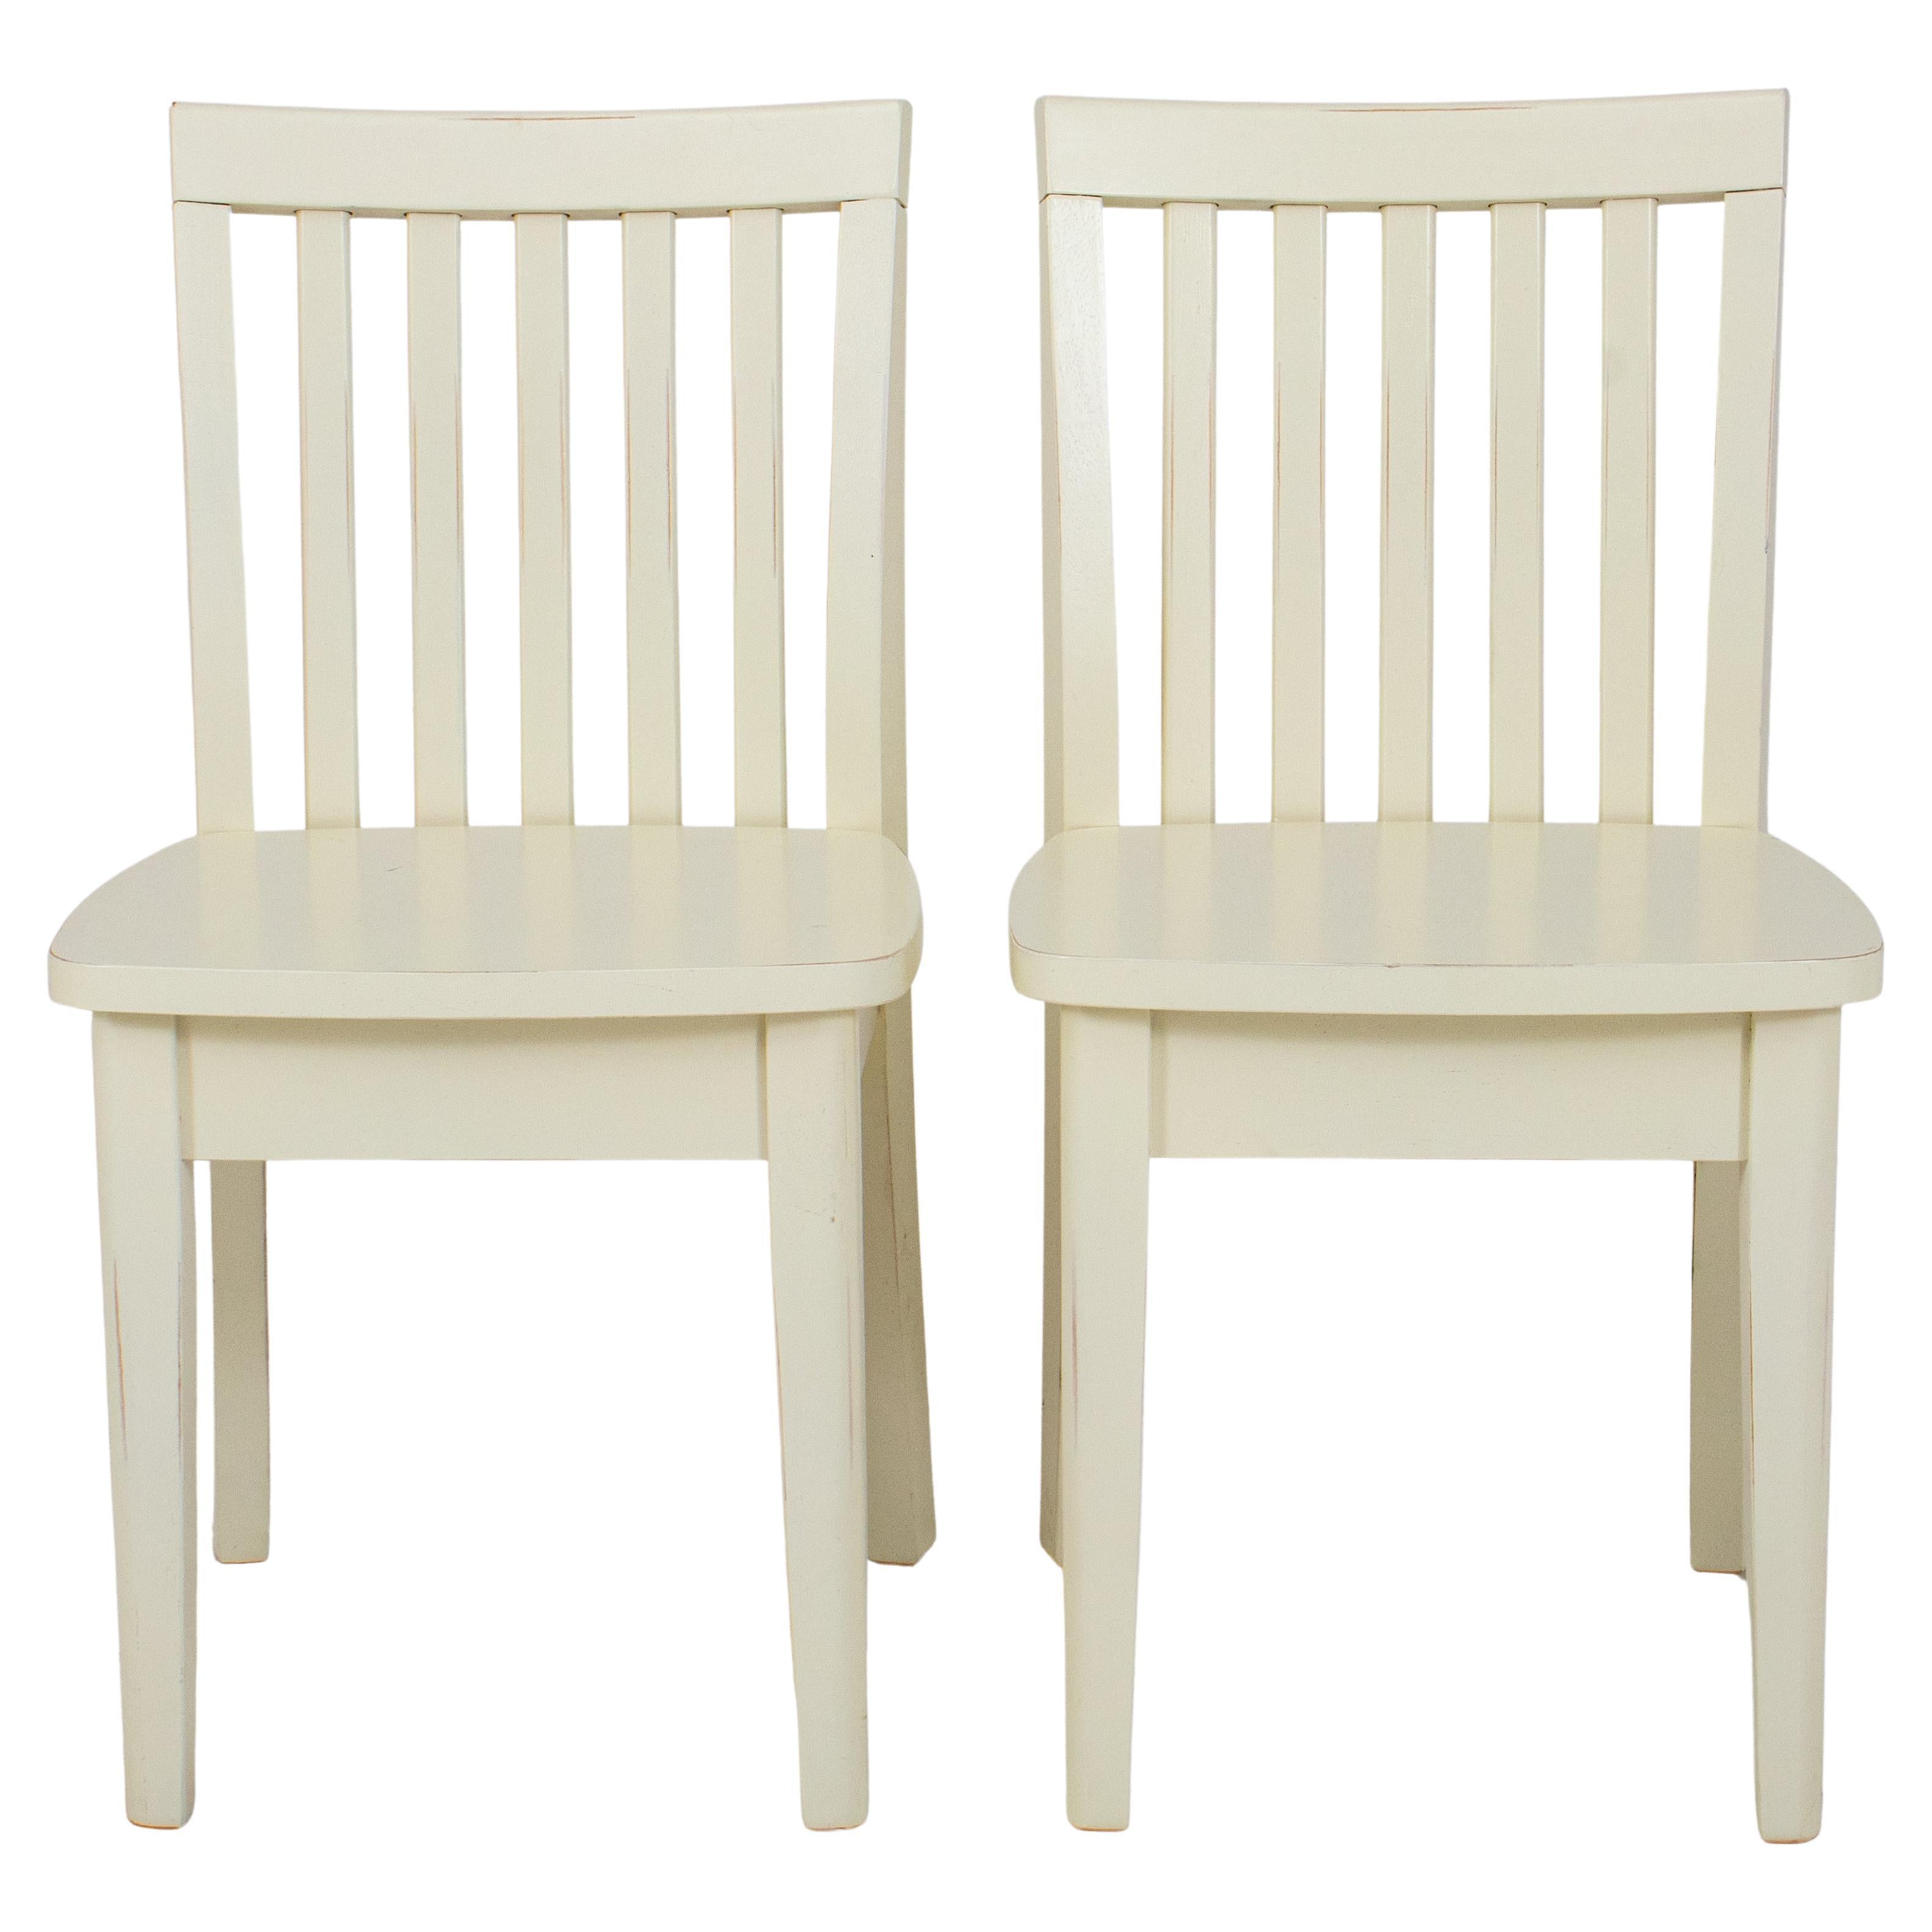 White-Painted Children's Chairs For Sale